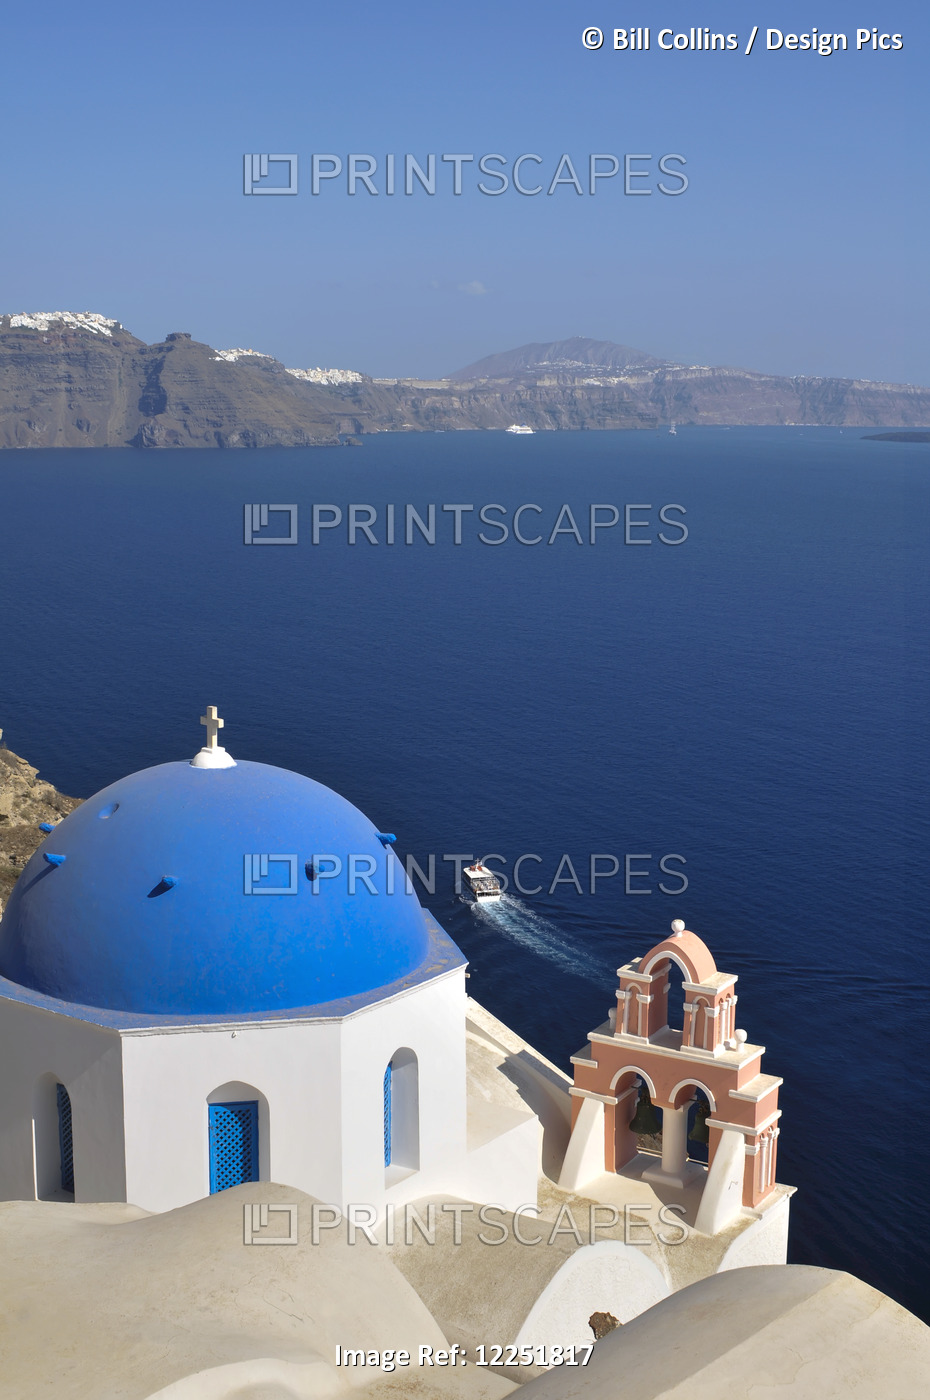 The Town Of Fira, The Capital Of The Island Of Santorini (Classically Thera, ...